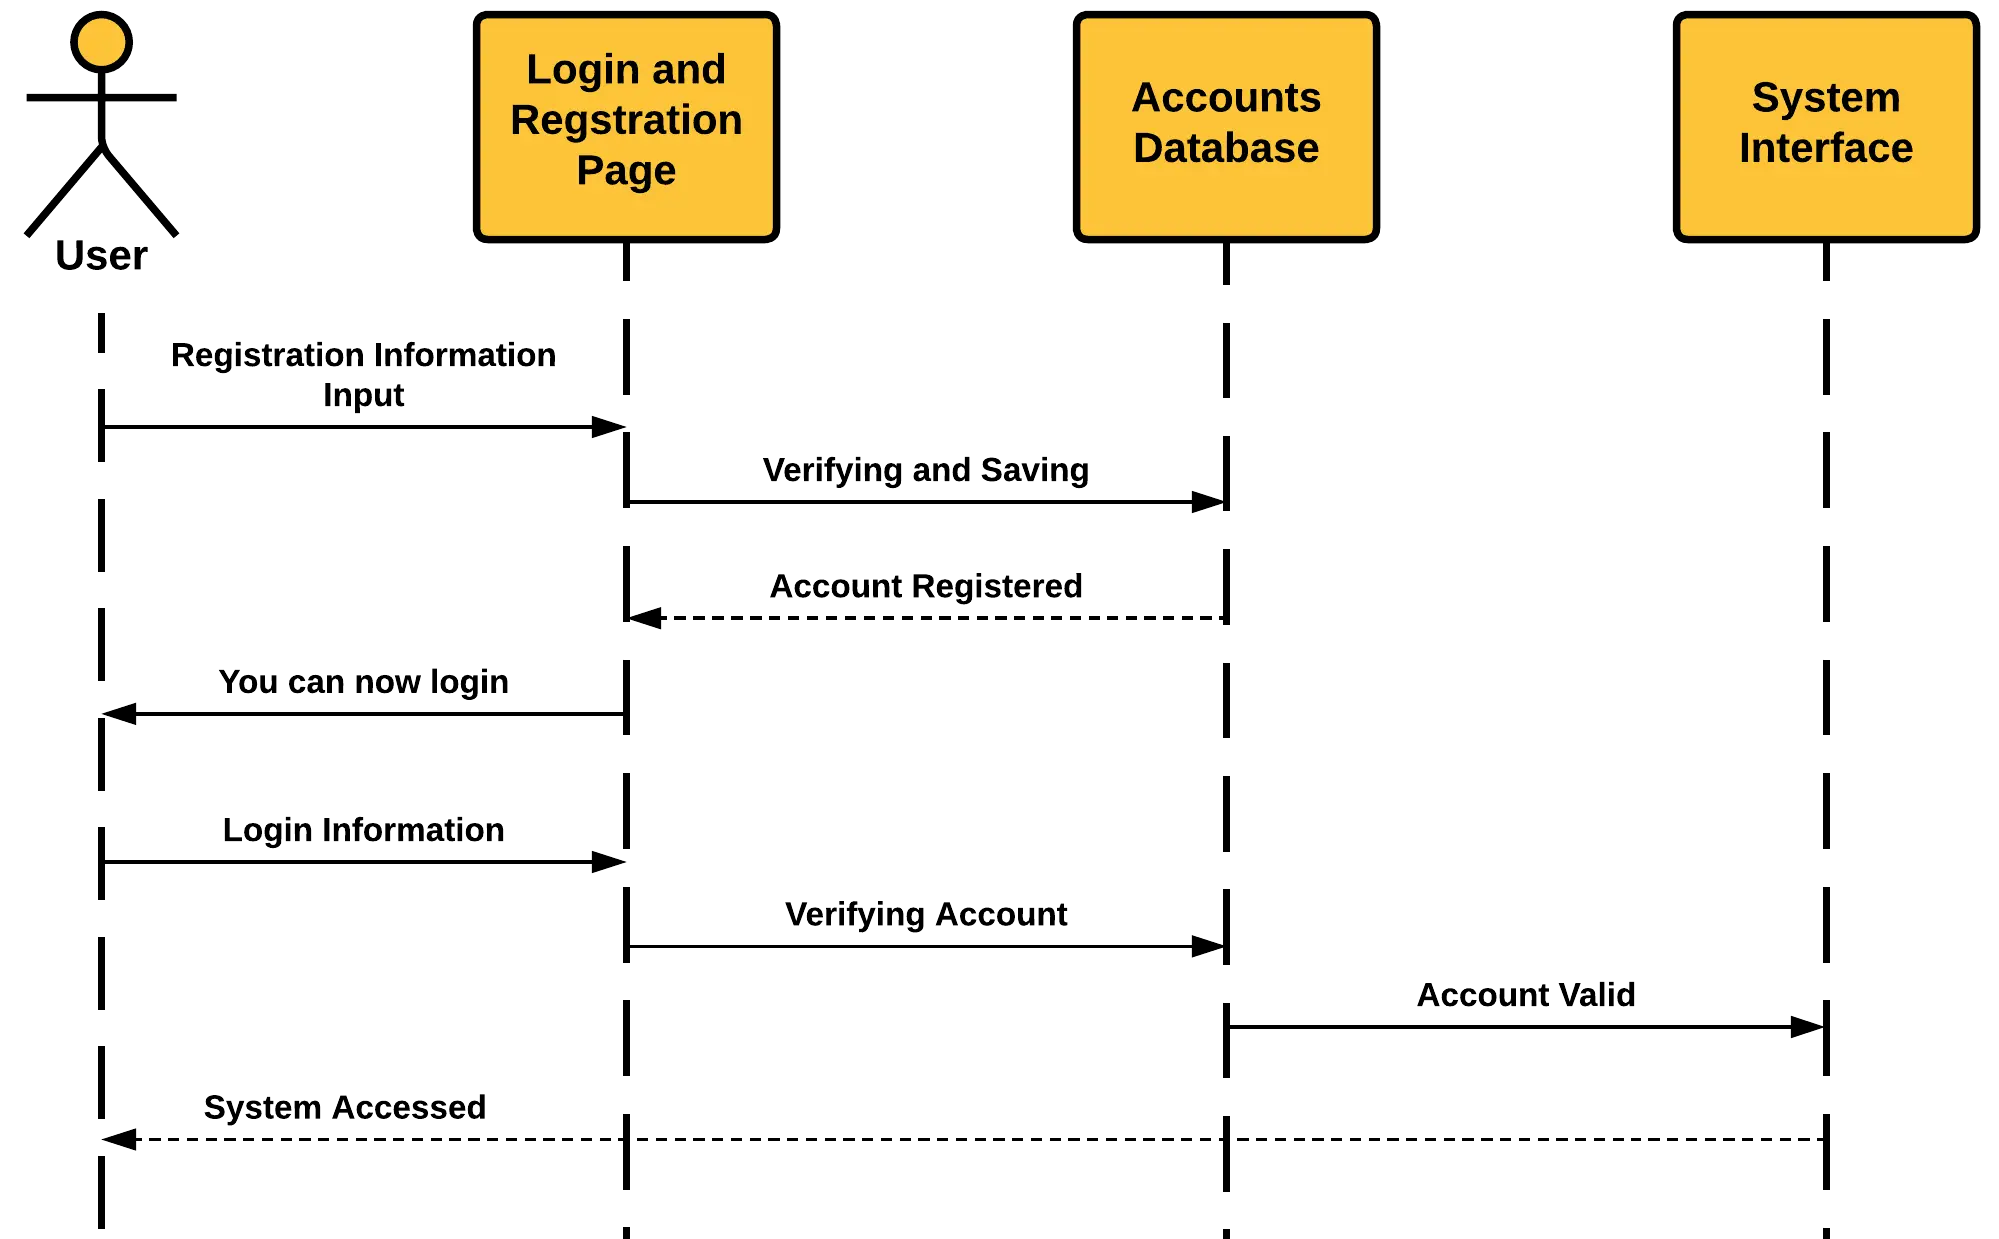 Sequence Diagram For Login And Registration Itsourcecode